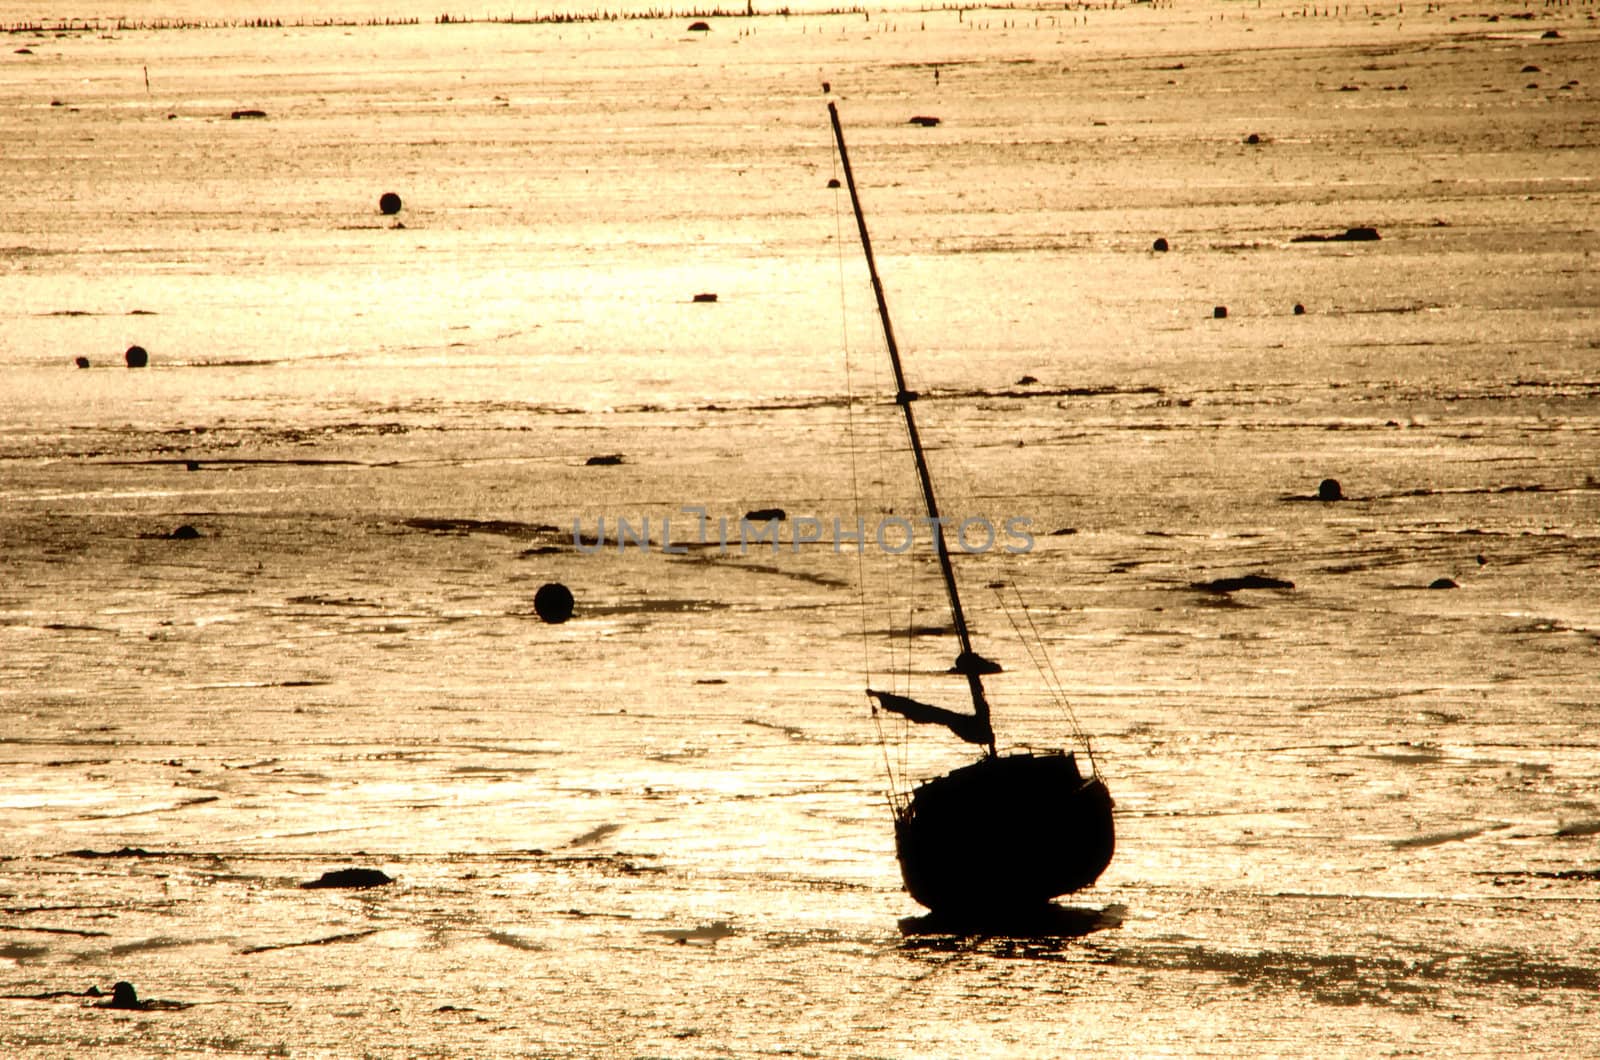 the sailboat at low tide